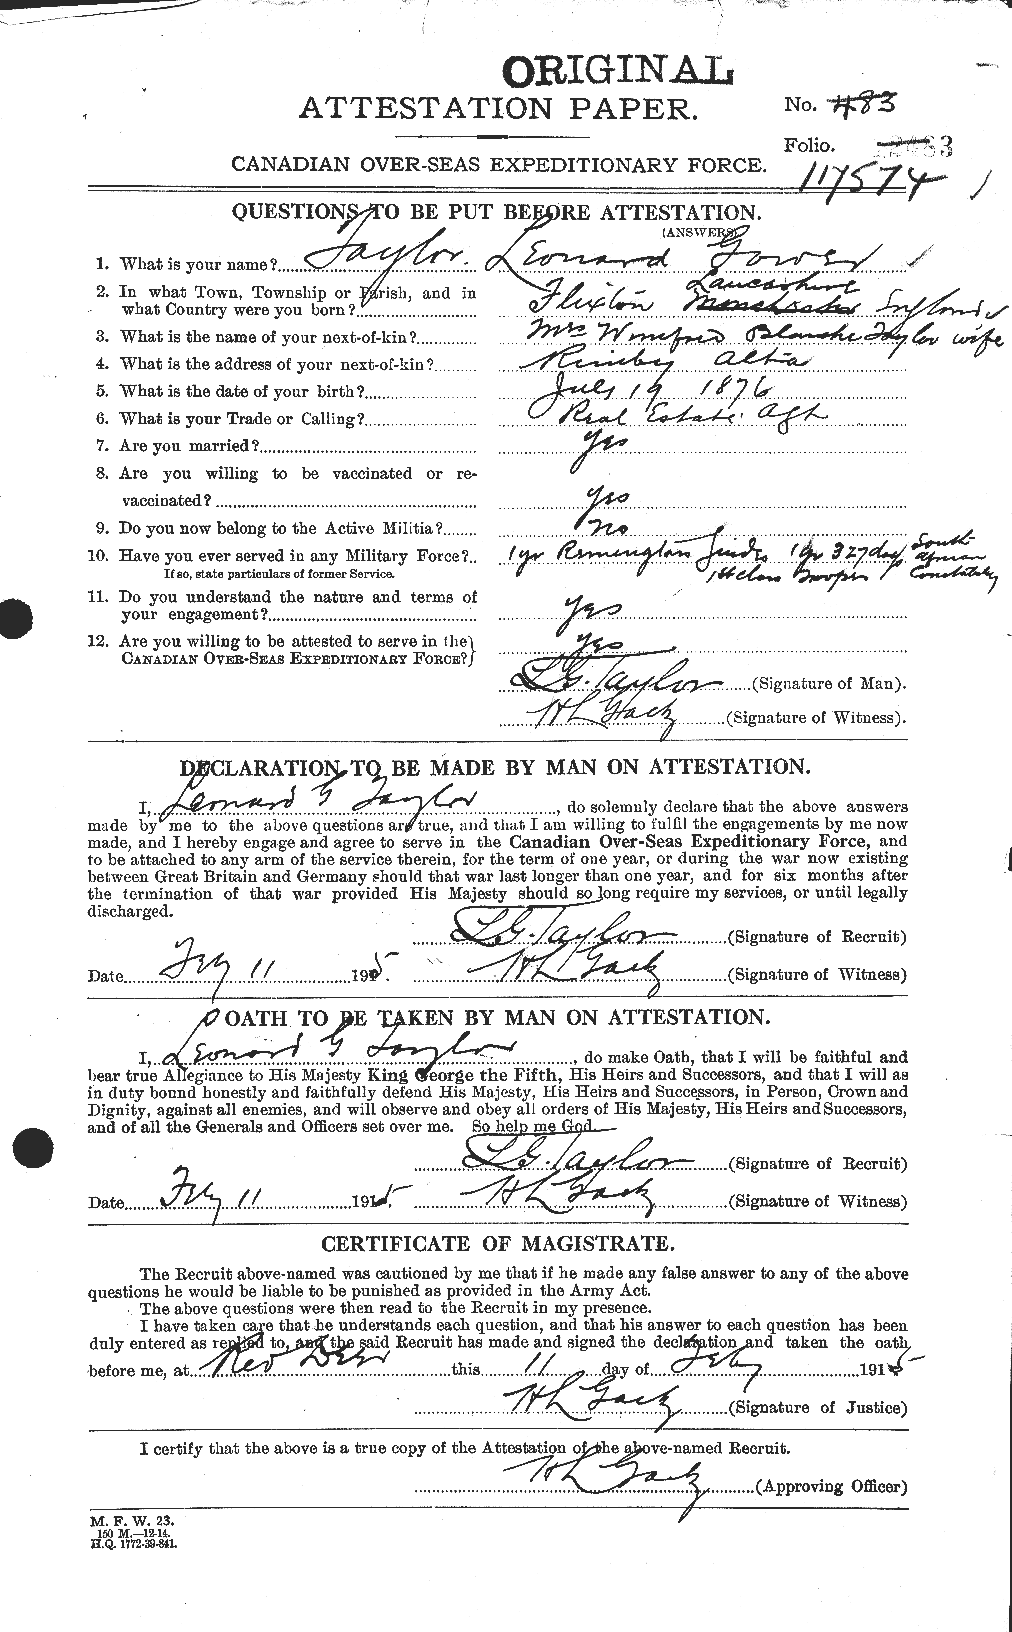 Personnel Records of the First World War - CEF 627629a